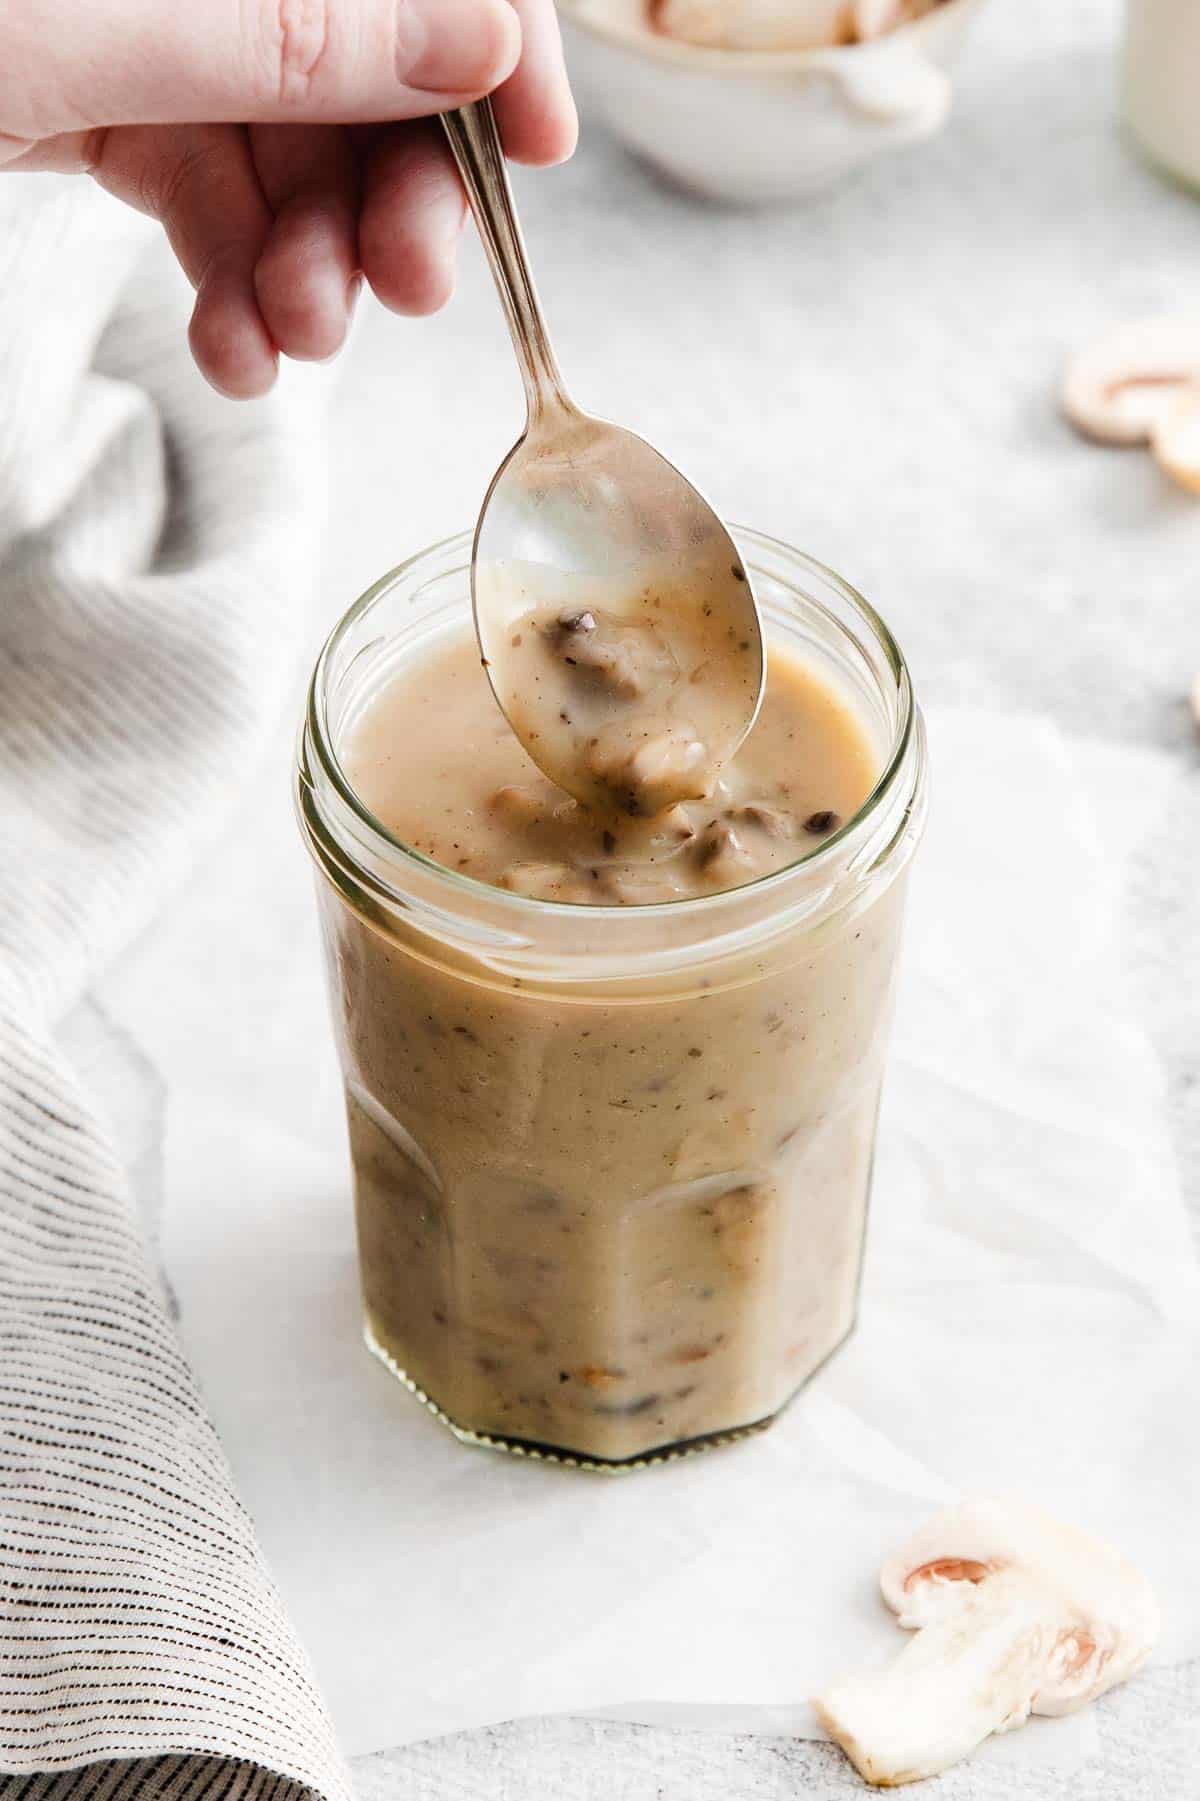 A spoon dipping into a cup of cream of mushroom soup